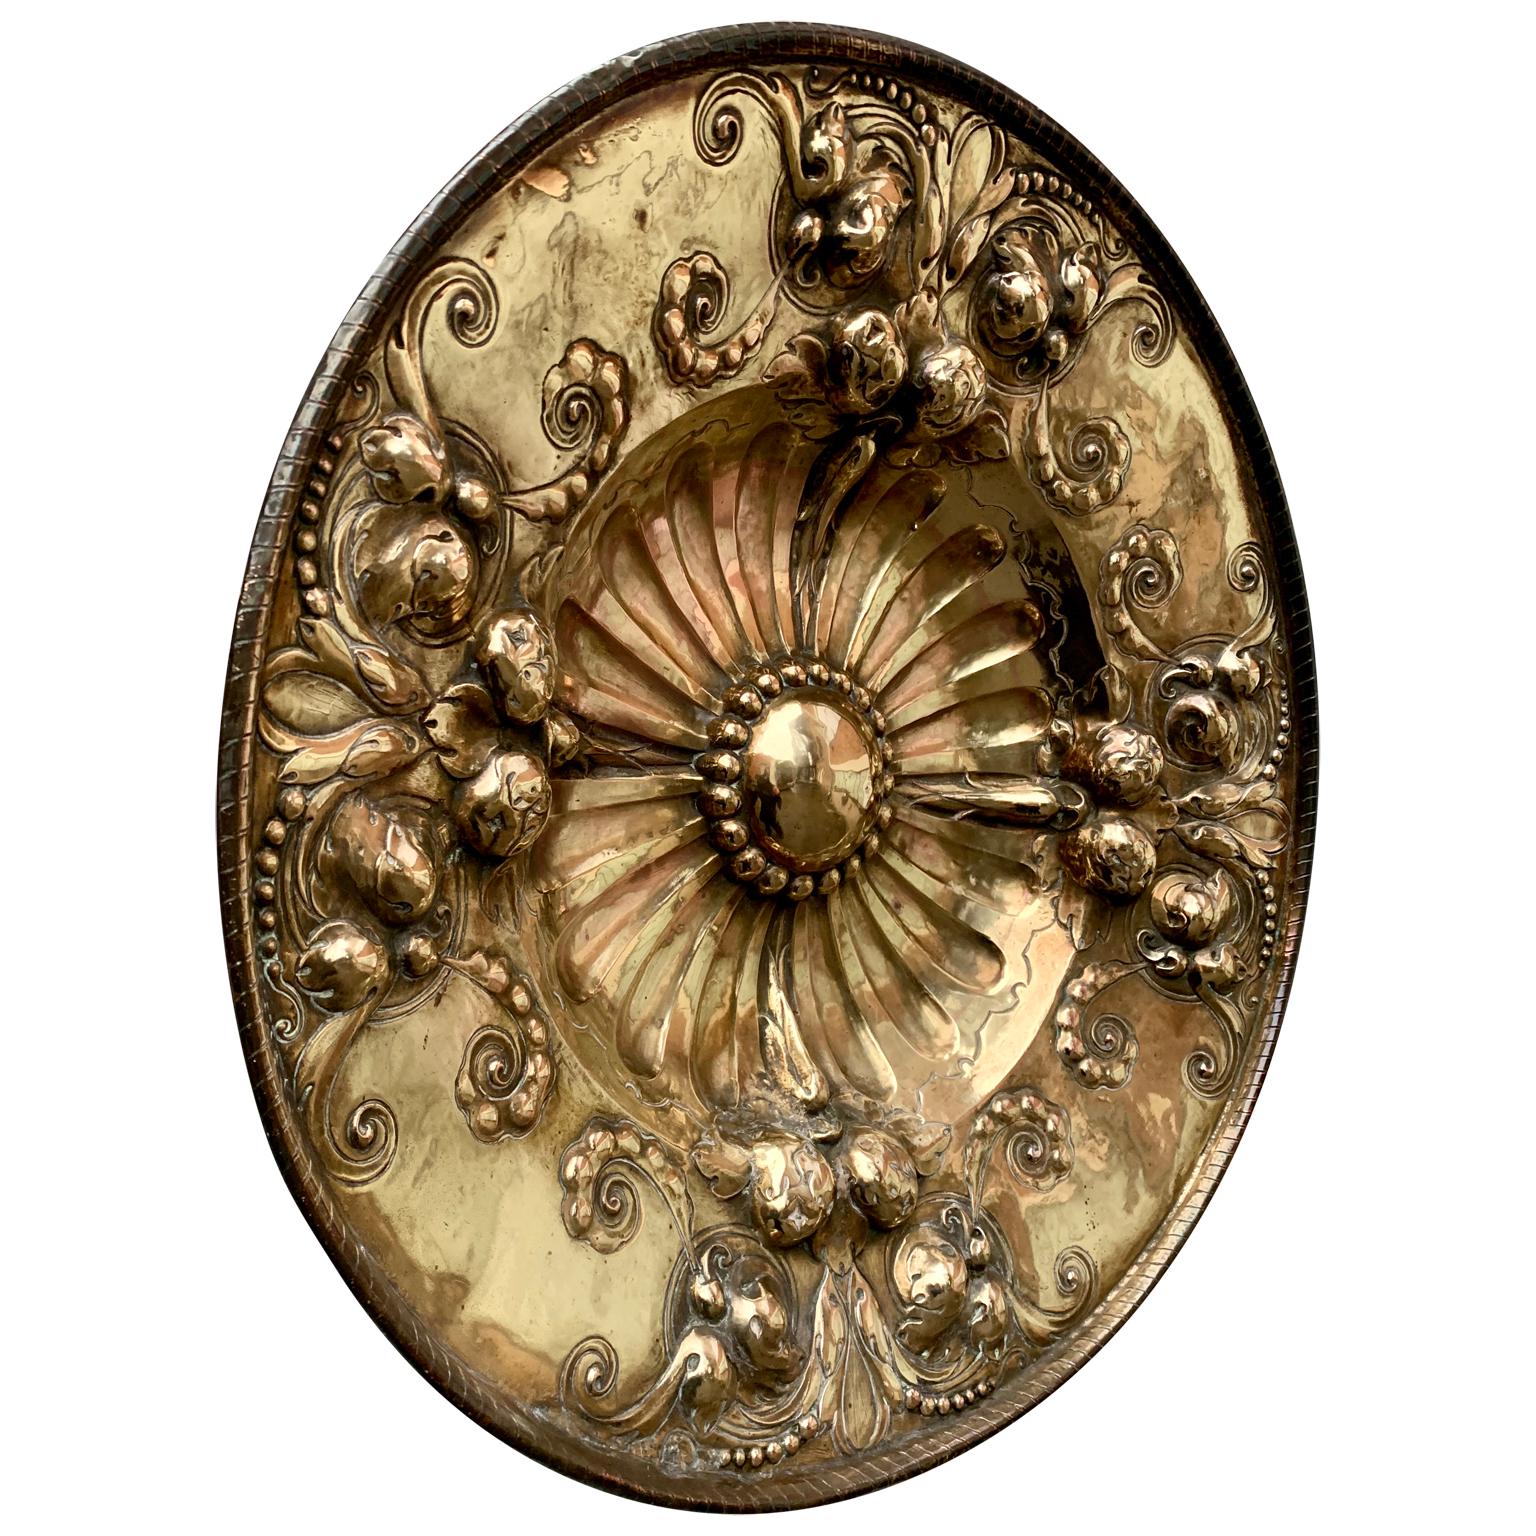 An 18th century baptismal plate in brass with beveled flower decoration to celebrate the birth of the infant or perhaps as in French is called 